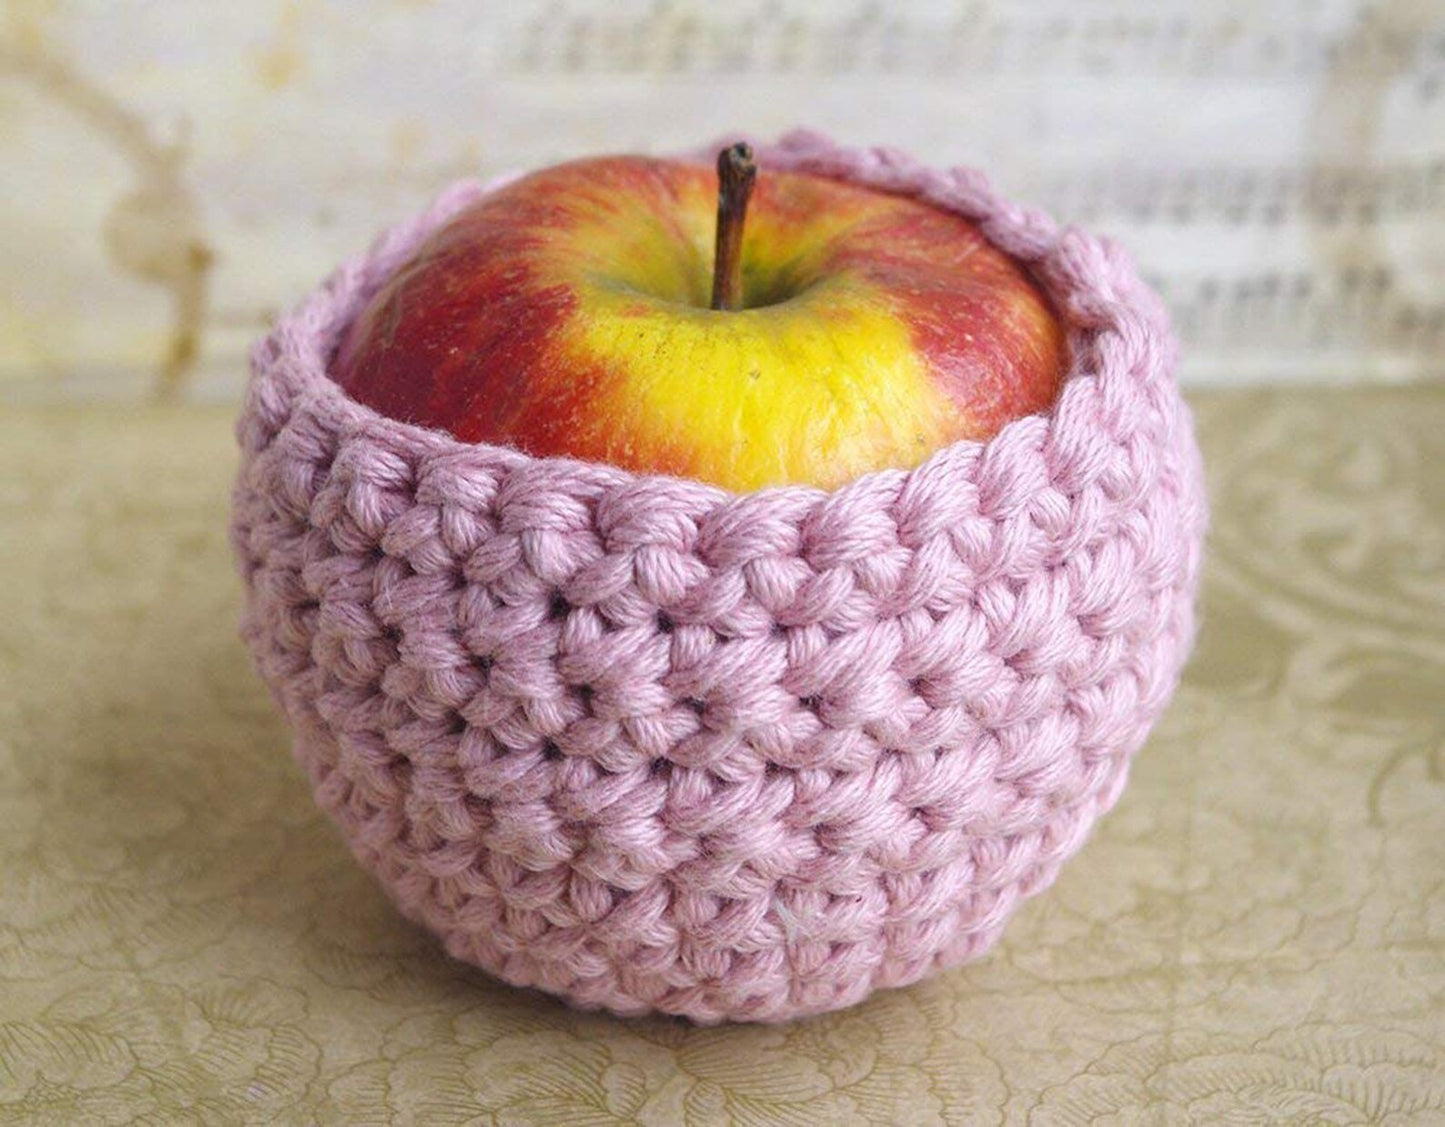 Pink Cozy Apple lunch bag - Handmade Crochet Cover - Zero Waste Gift - Bear button - Cute and convenient